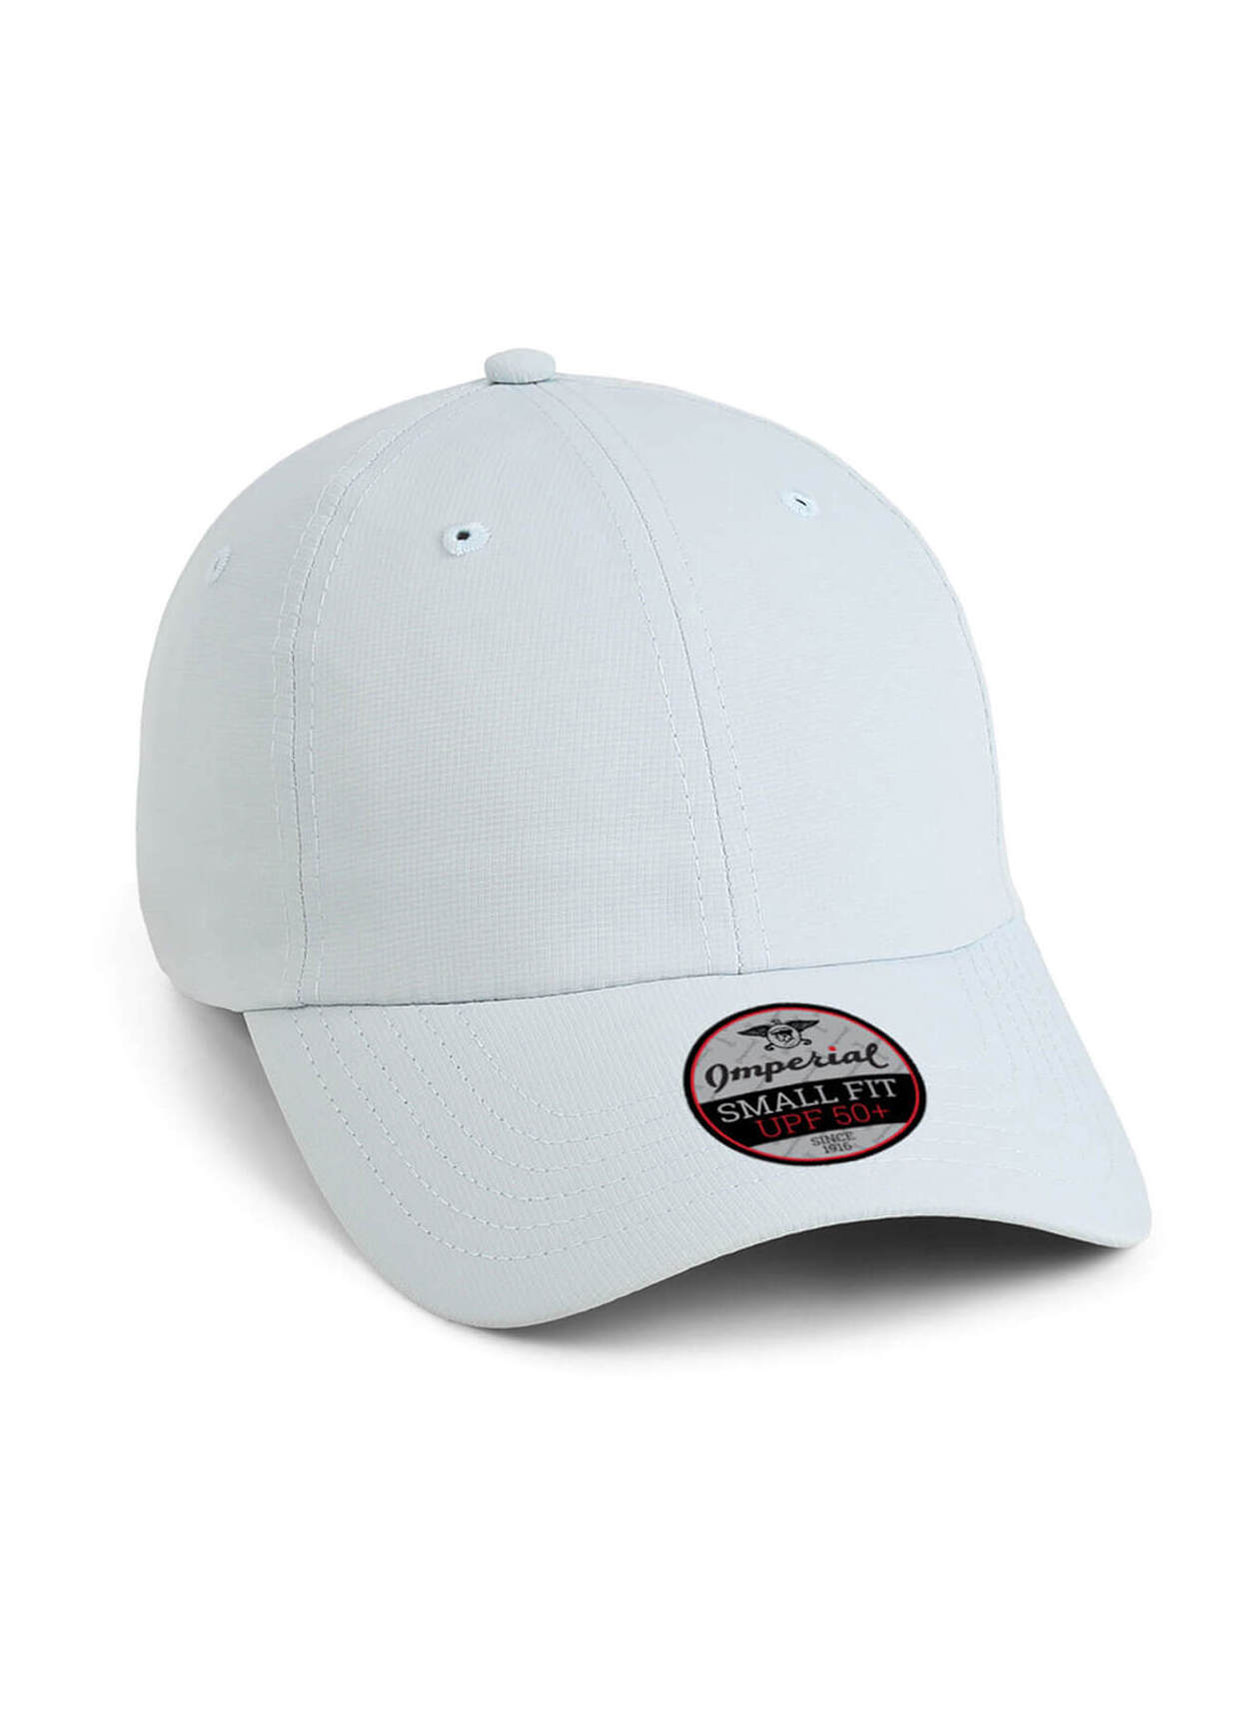 Imperial Glacier Original Small Fit Performance Hat